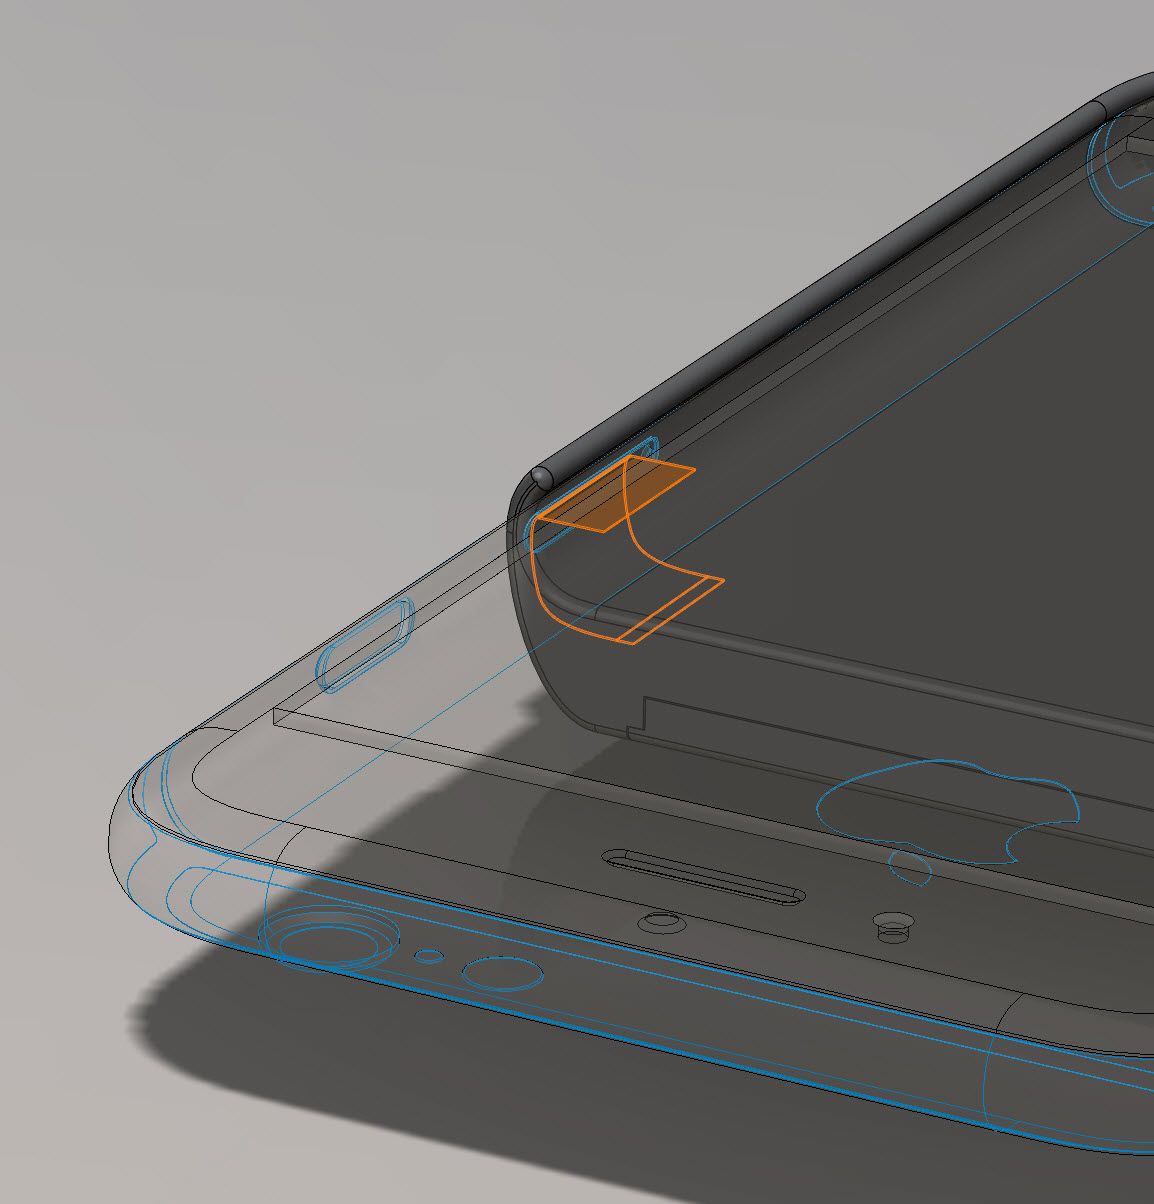 Edward Snowden designed an iPhone case to prevent wireless snooping